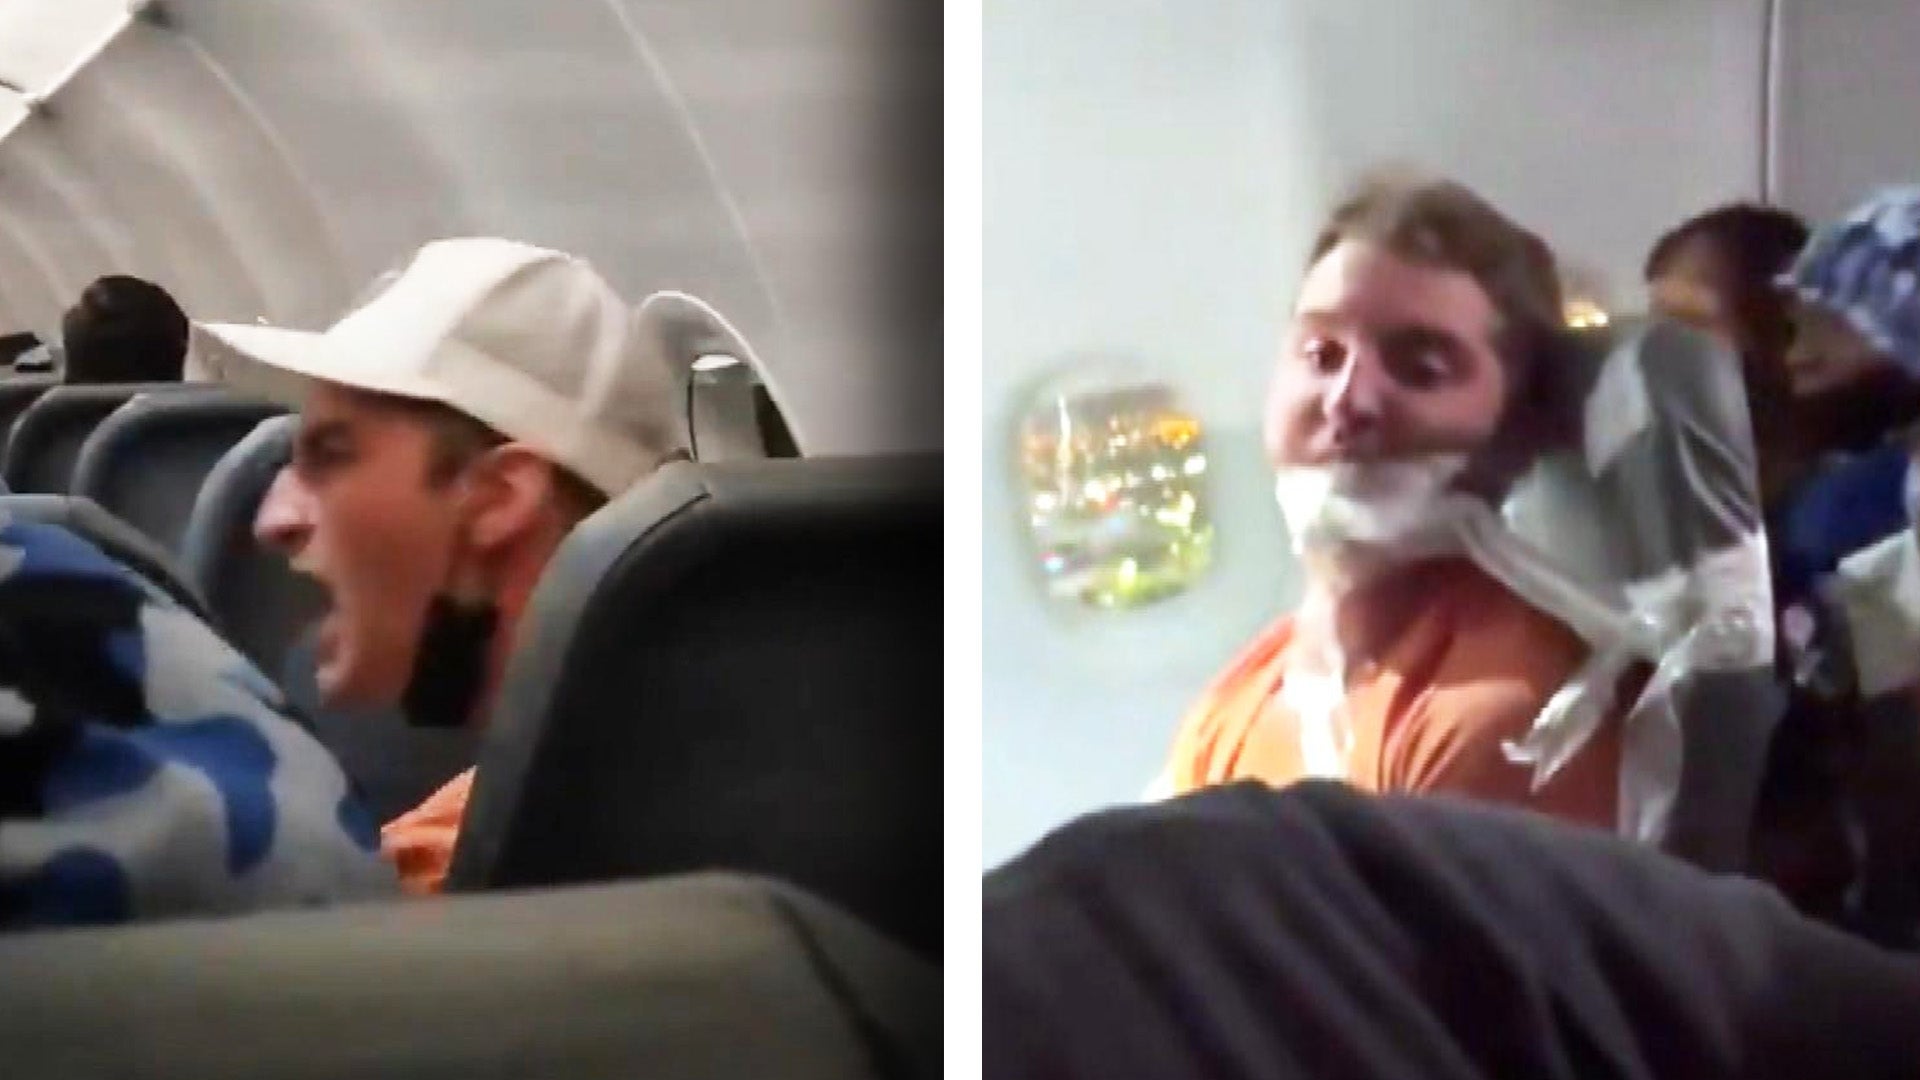 Man Who Shot Viral Video Of Duct Taped Man Accused Of Groping Frontier Flight Crew Speaks Out